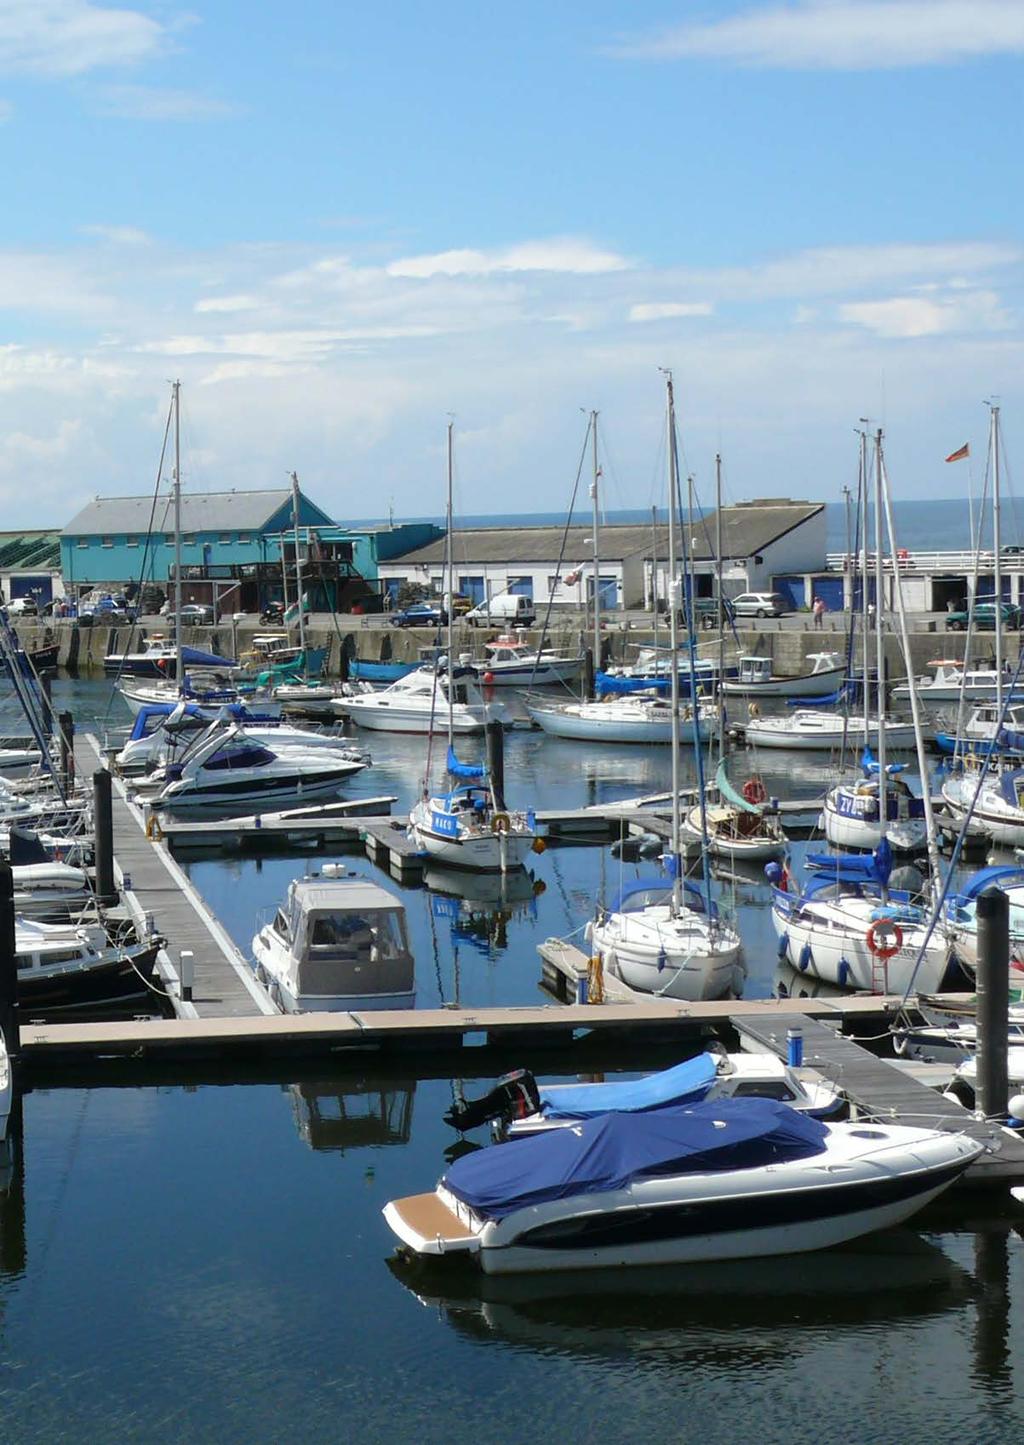 THIS PAGE: Cardiff Marine Group s